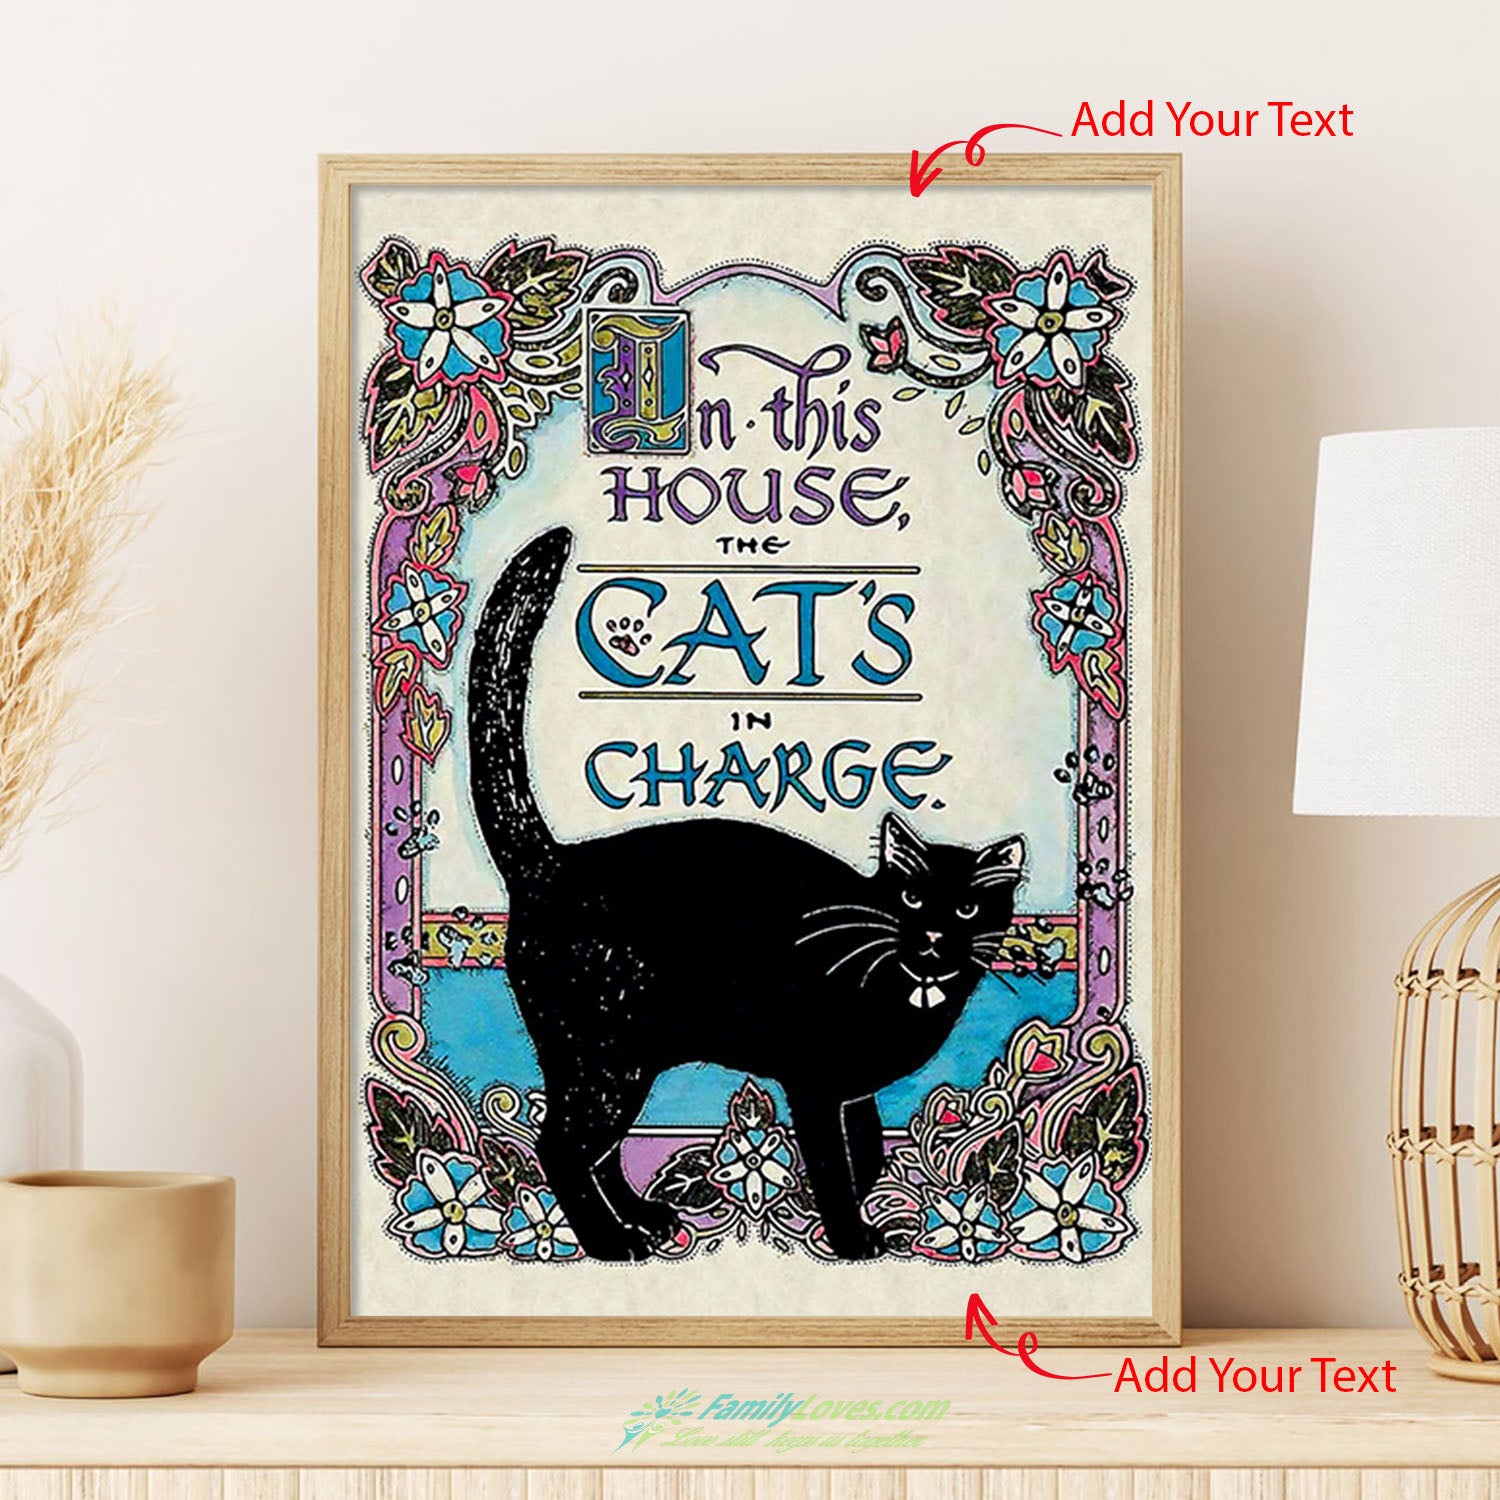 In The House Cat Charge Canvas Wall Decor Poster Decor All Size 1